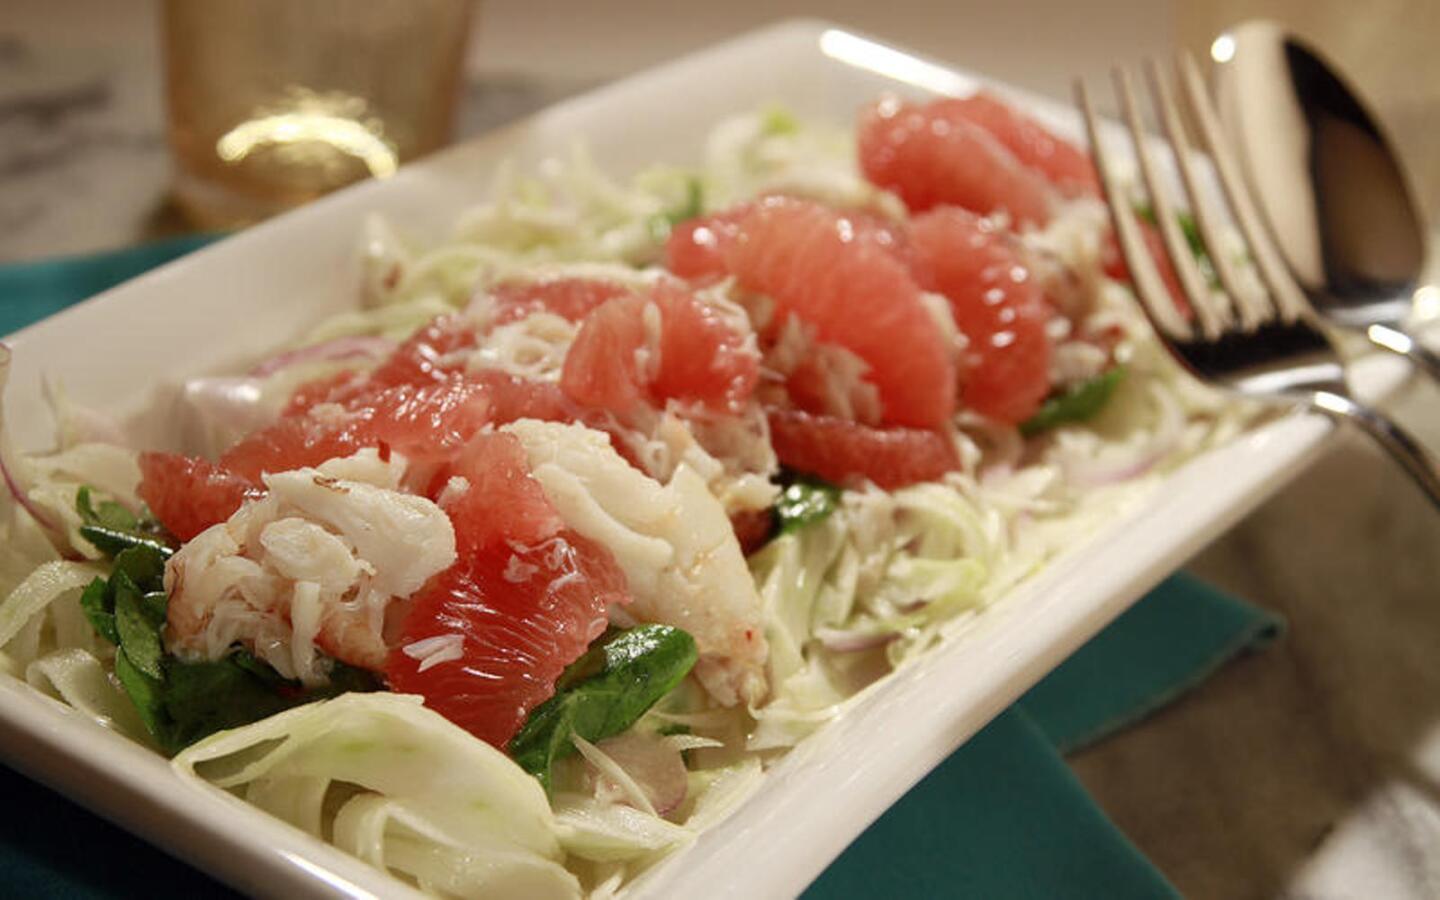 Grapefruit and fennel salad with crab